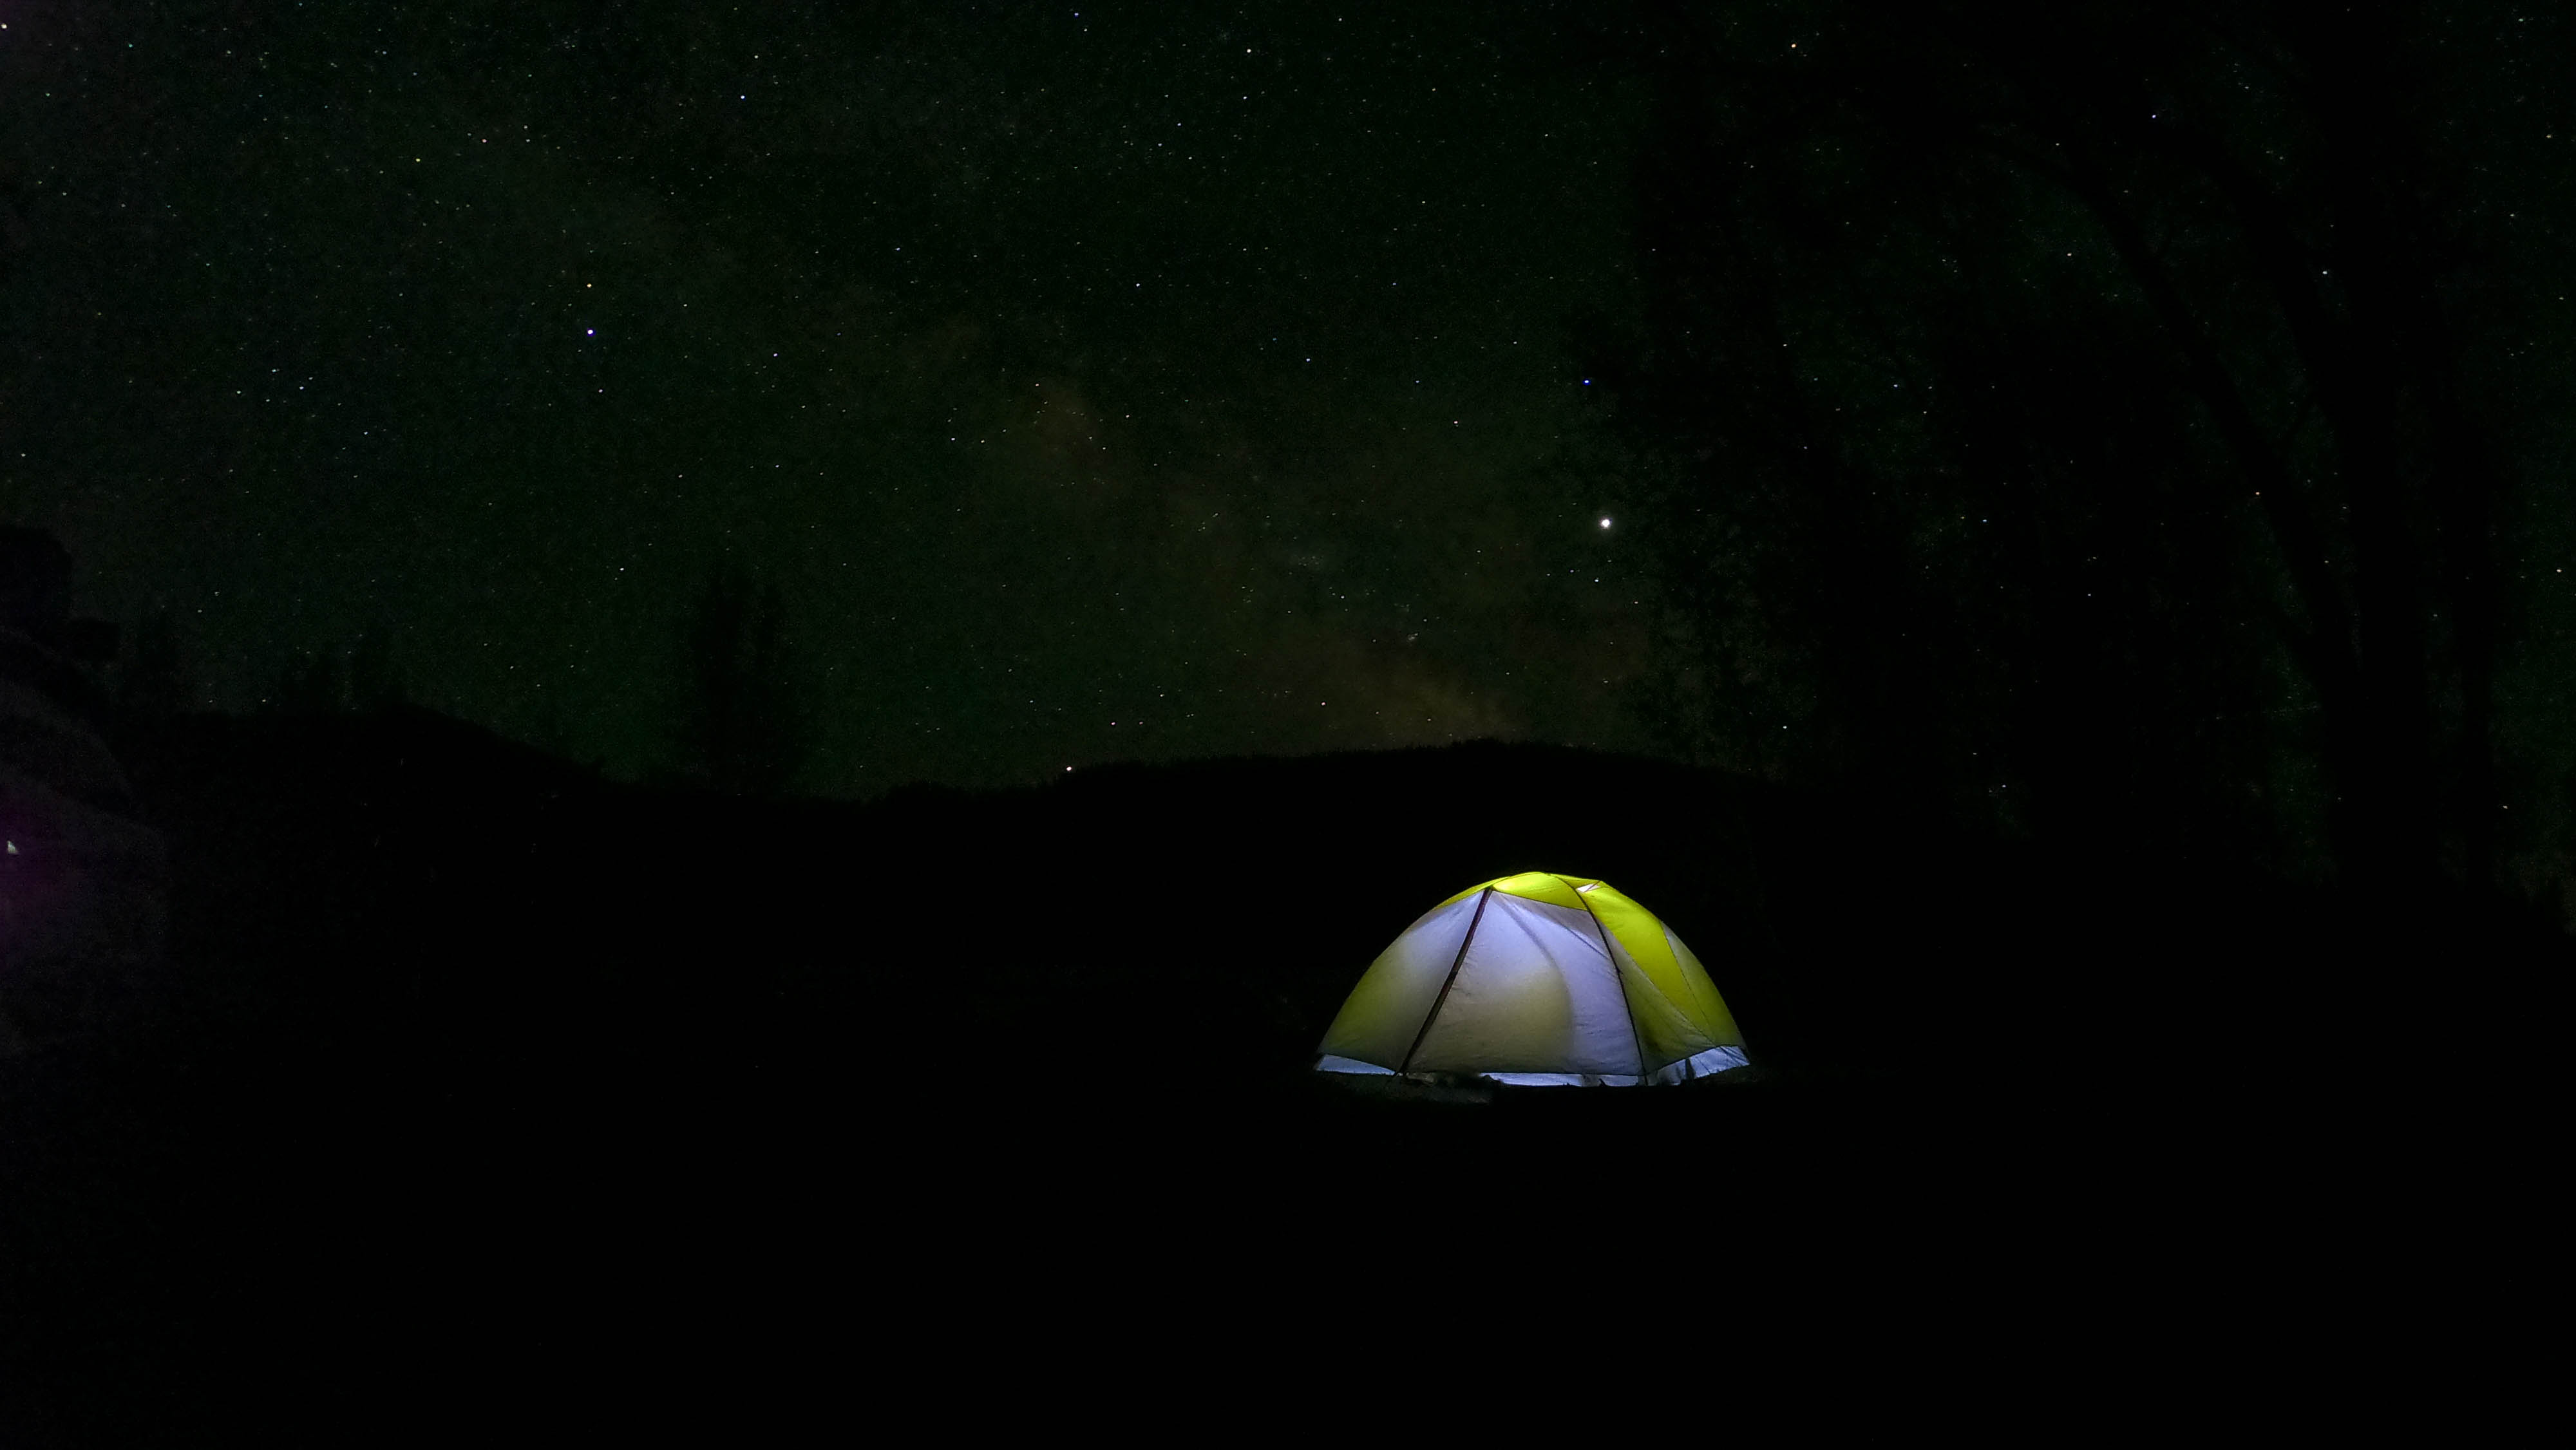 3 Ways to Minimize Light Pollution While Camping - Leave No Trace